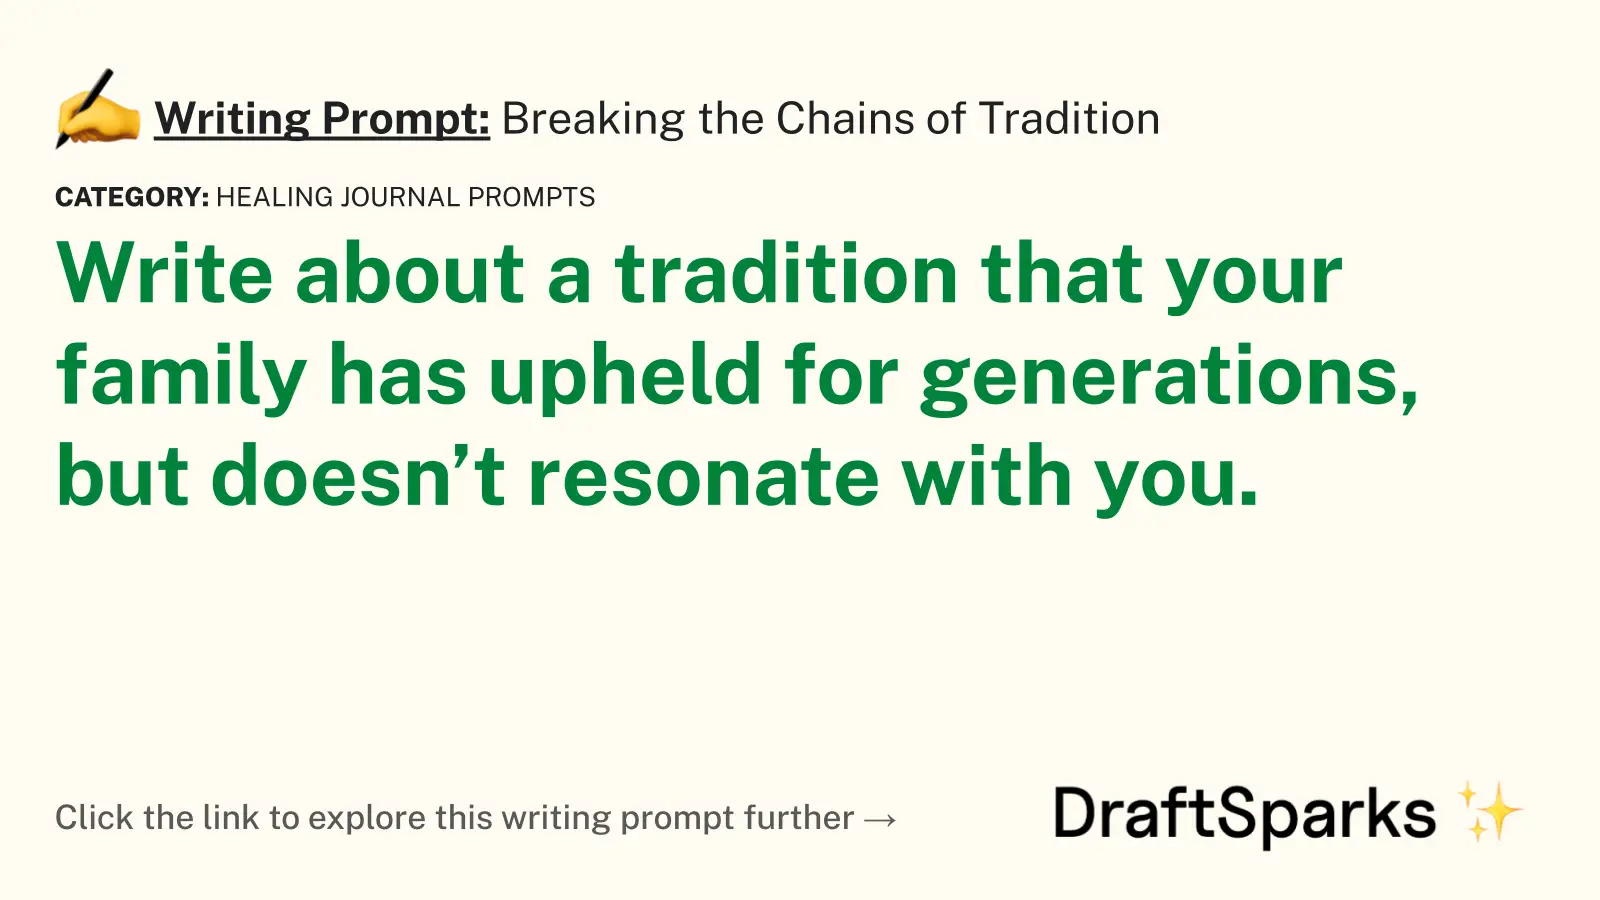 Breaking the Chains of Tradition